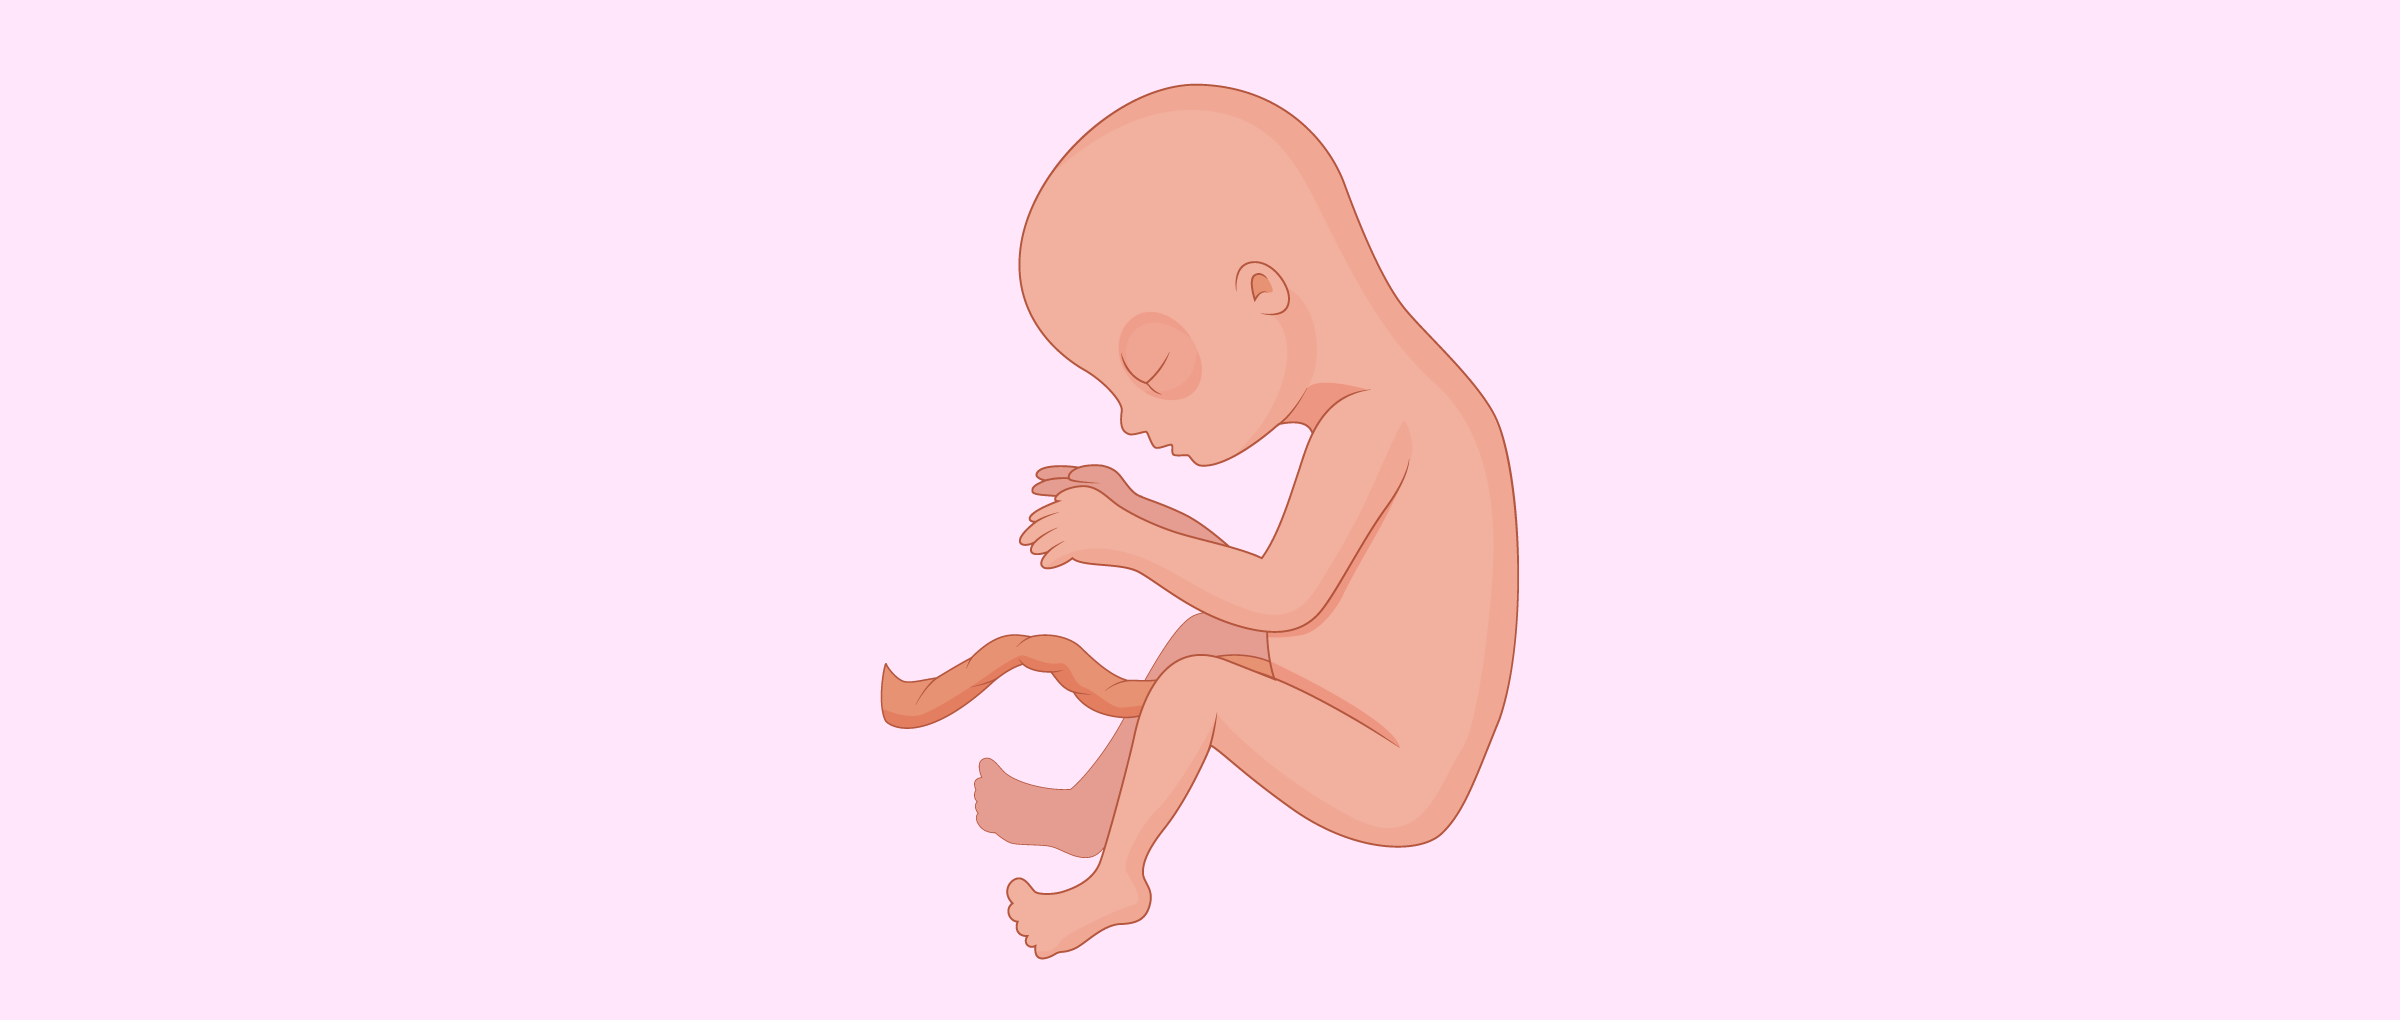 Fetus at four months old